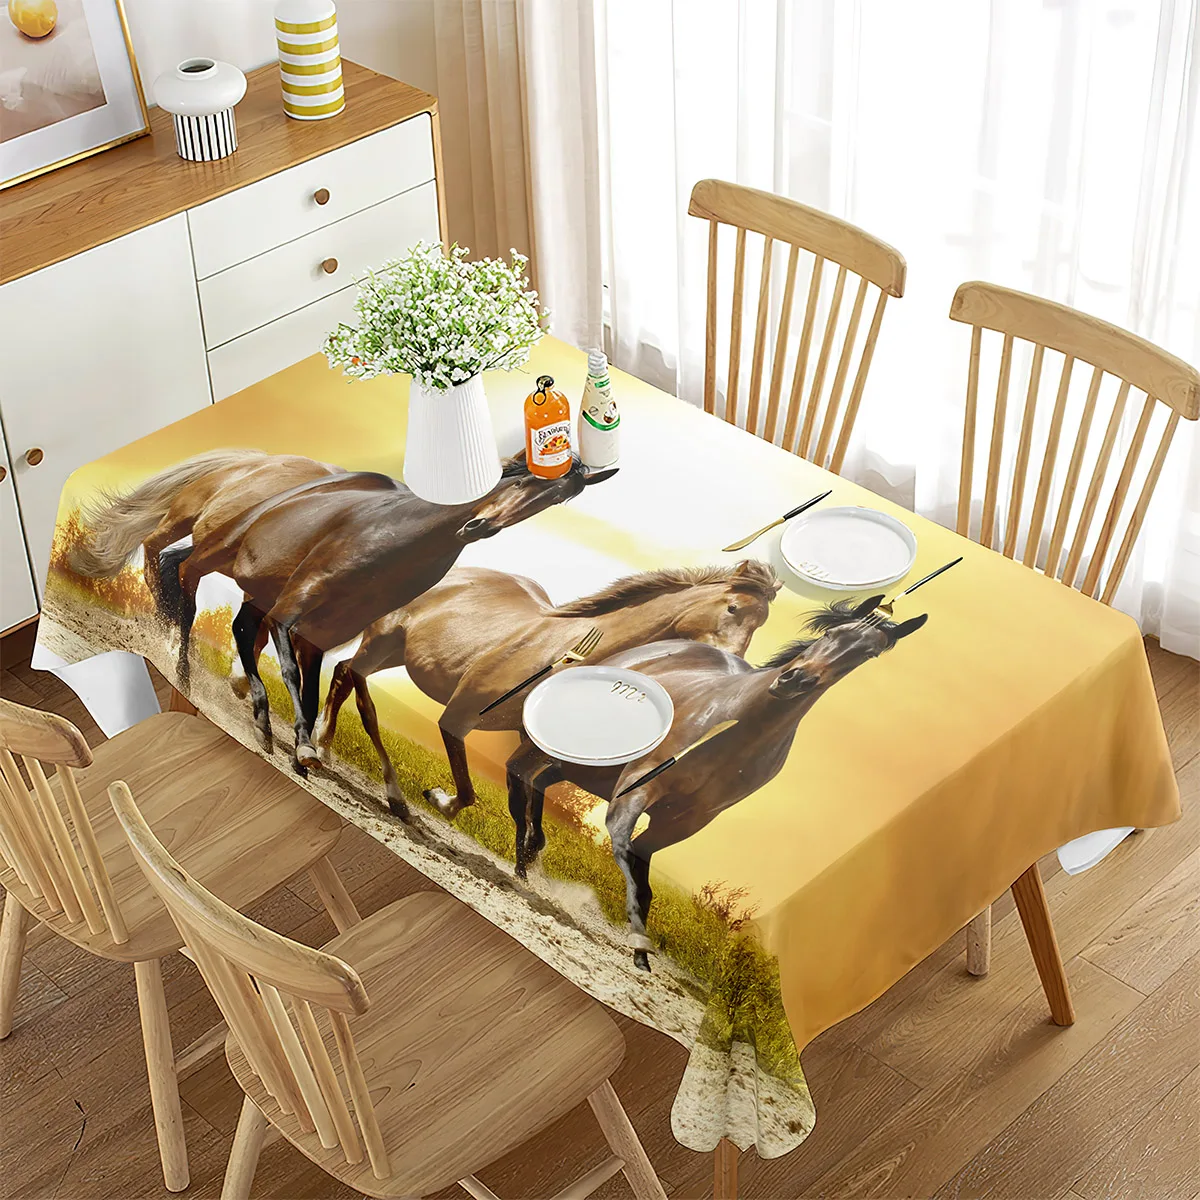 

Tablecloth Rectangular Running Horse Grassland Animal Sunset for Home Decor Tablecloth Kitchen Dining Room Party Tea Table Decor